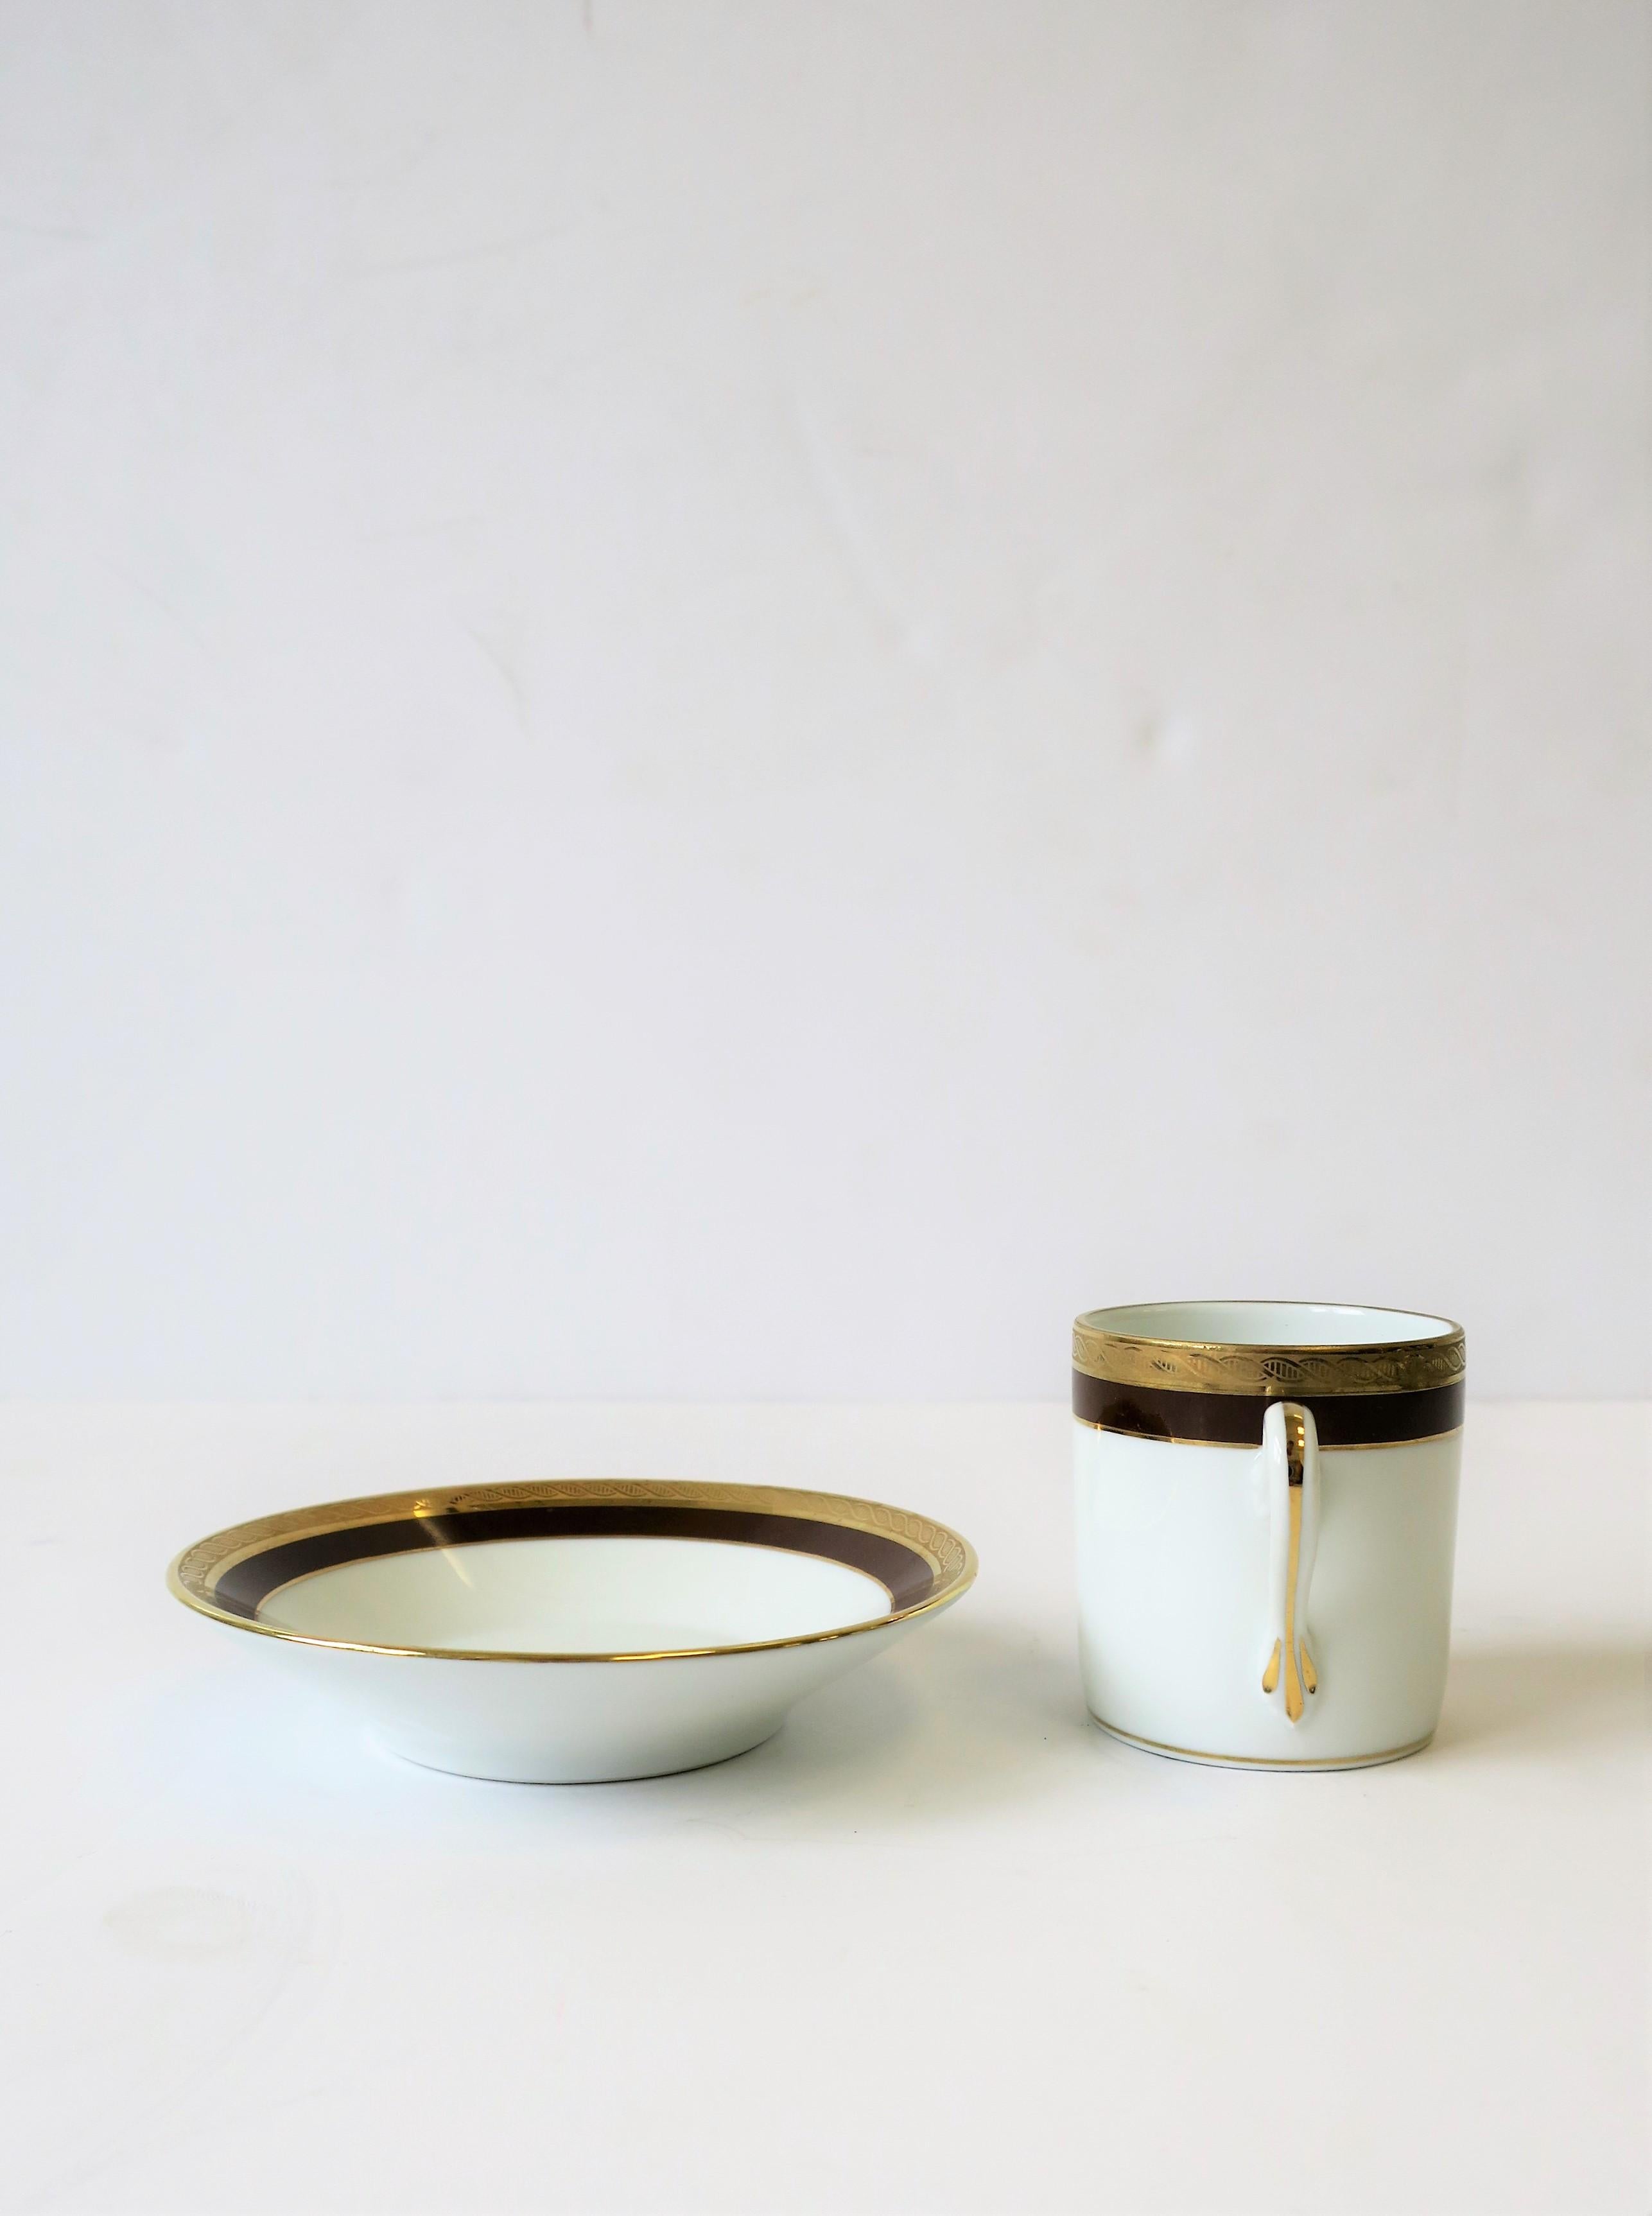 20th Century Designer White and Gold Italian Espresso Cup and Saucer by Richard Ginori